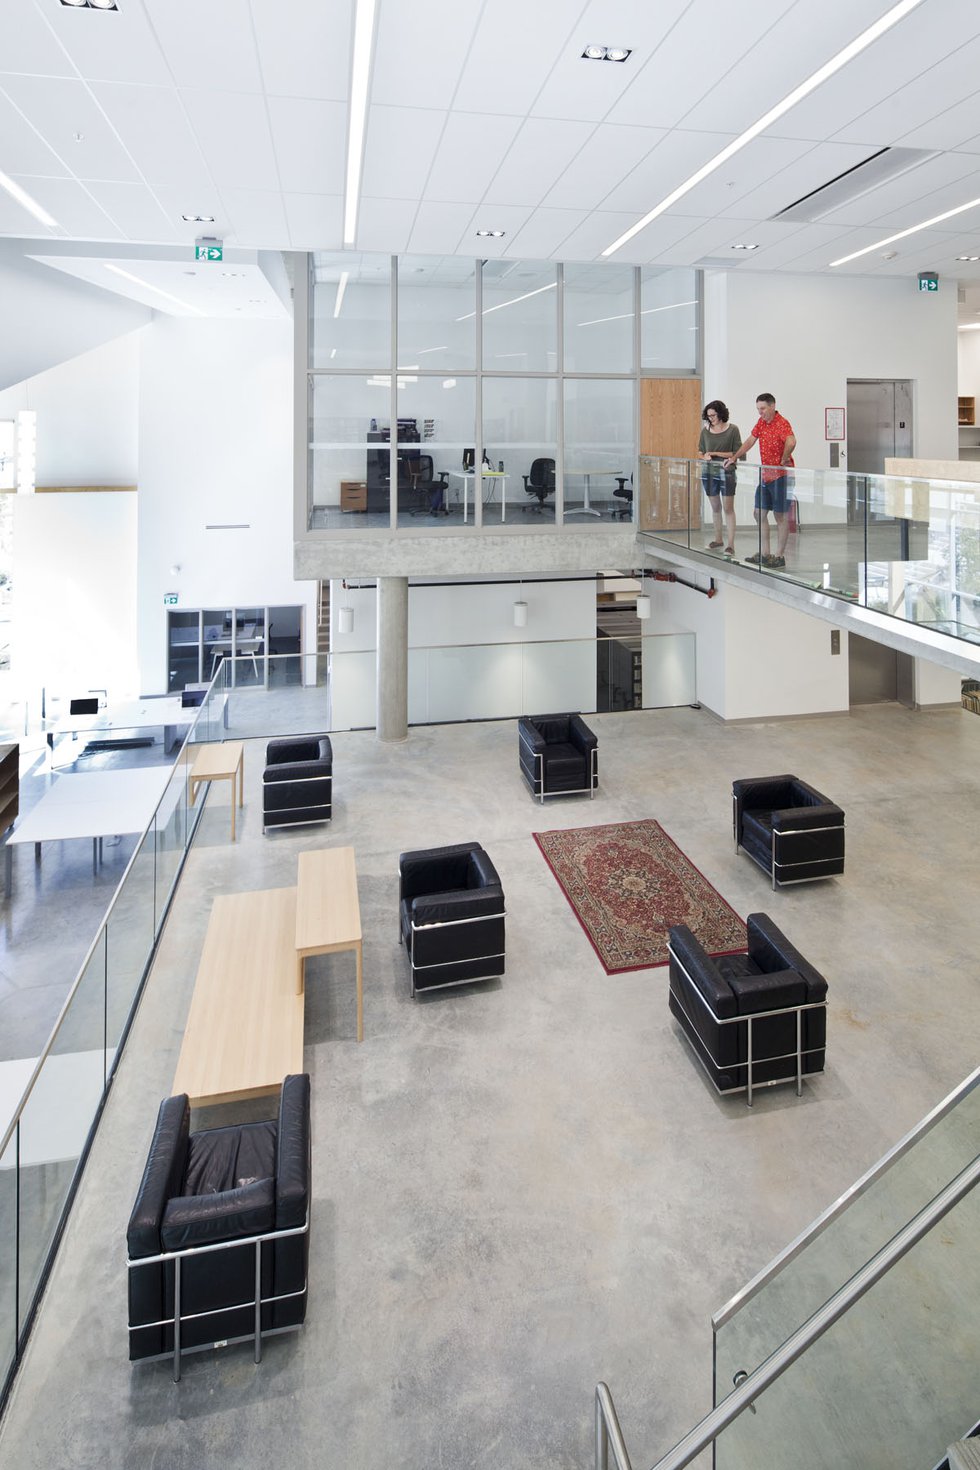 The mezzanine level of the library and learning commons at Emily Carr University of Art and Design in Vancouver. Photo courtesy of ECUAD.